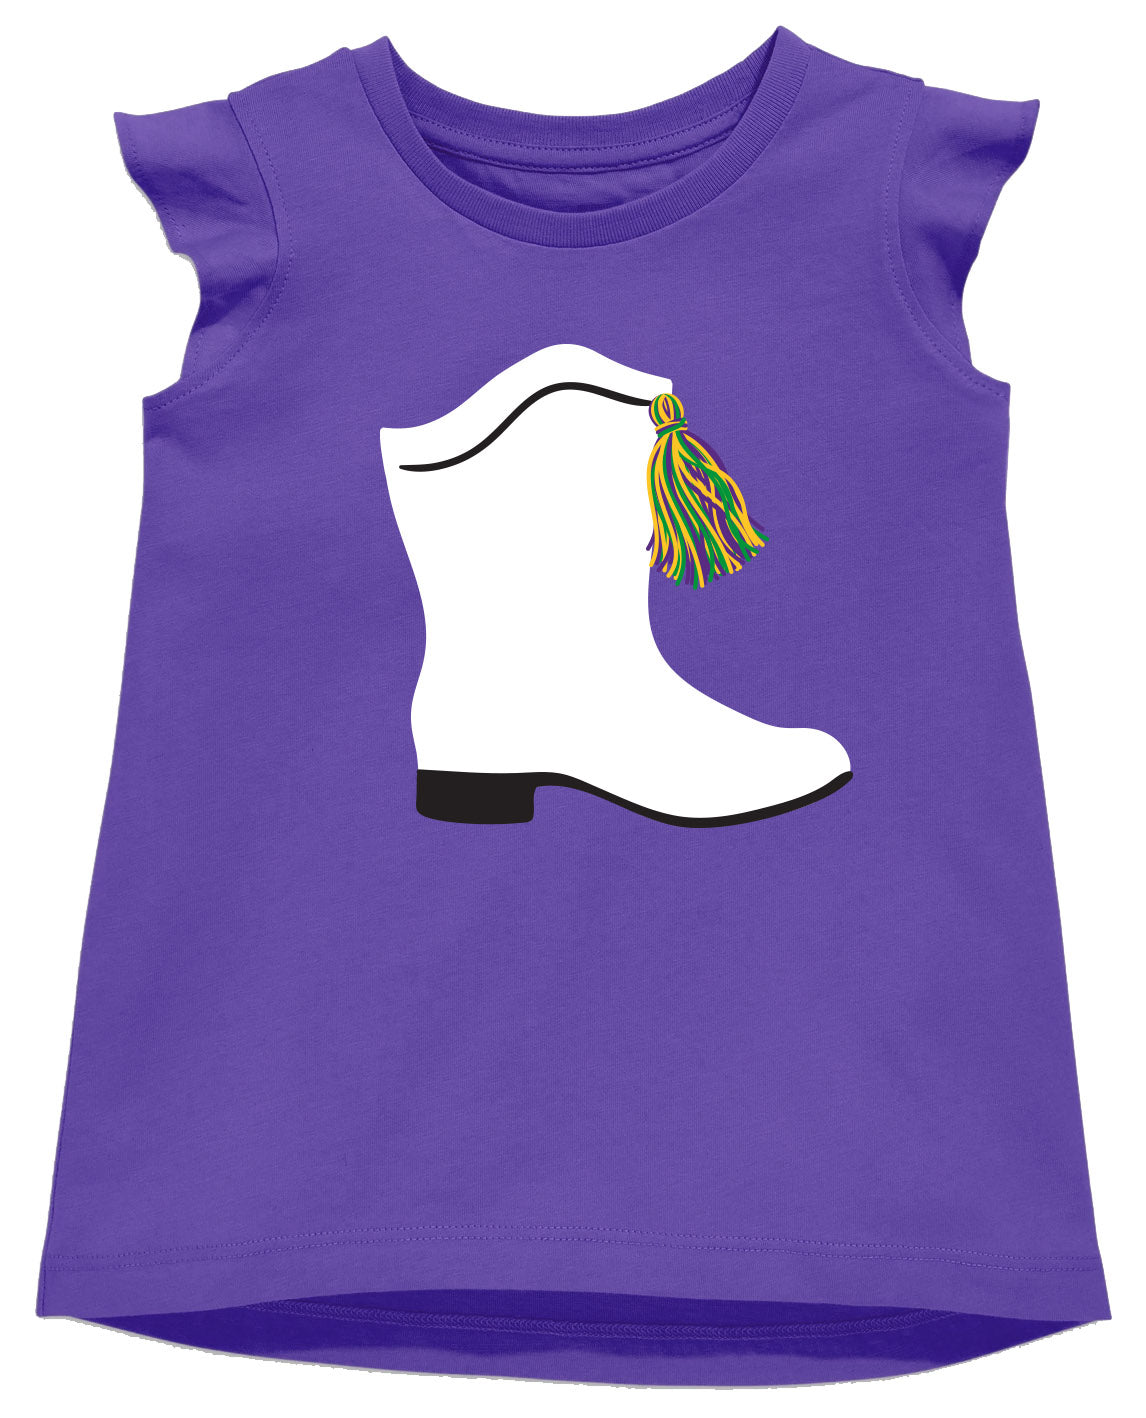 A purple t-shirt with a Mardi Gras image of a cowboy boot named Sequin Mardi Gras Marching Boot Purple Ruffle Top by the brand Azarhia.